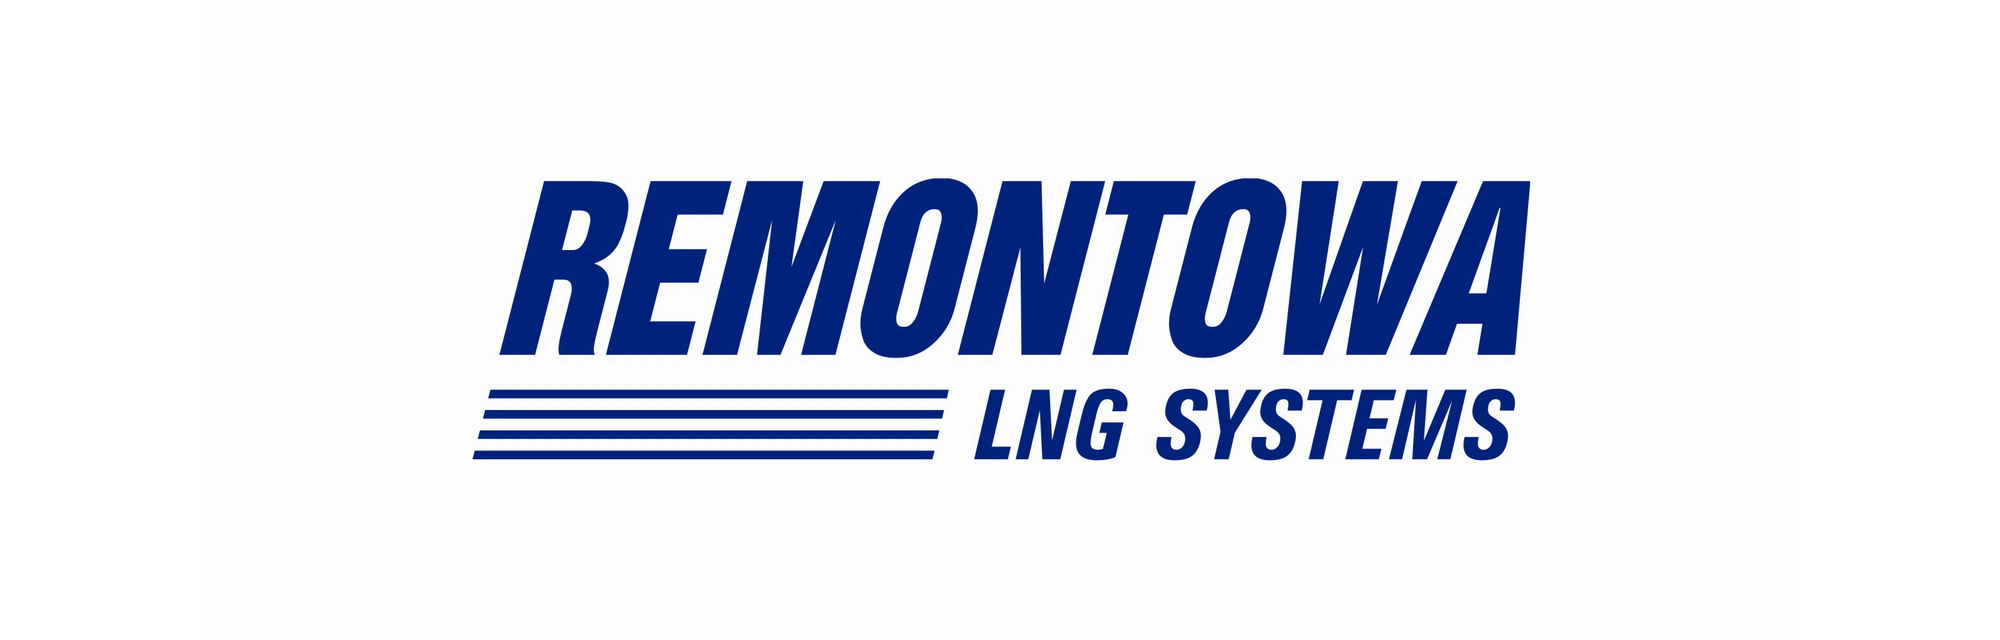 Remontowa LNG Systems - dystrybucja LNG